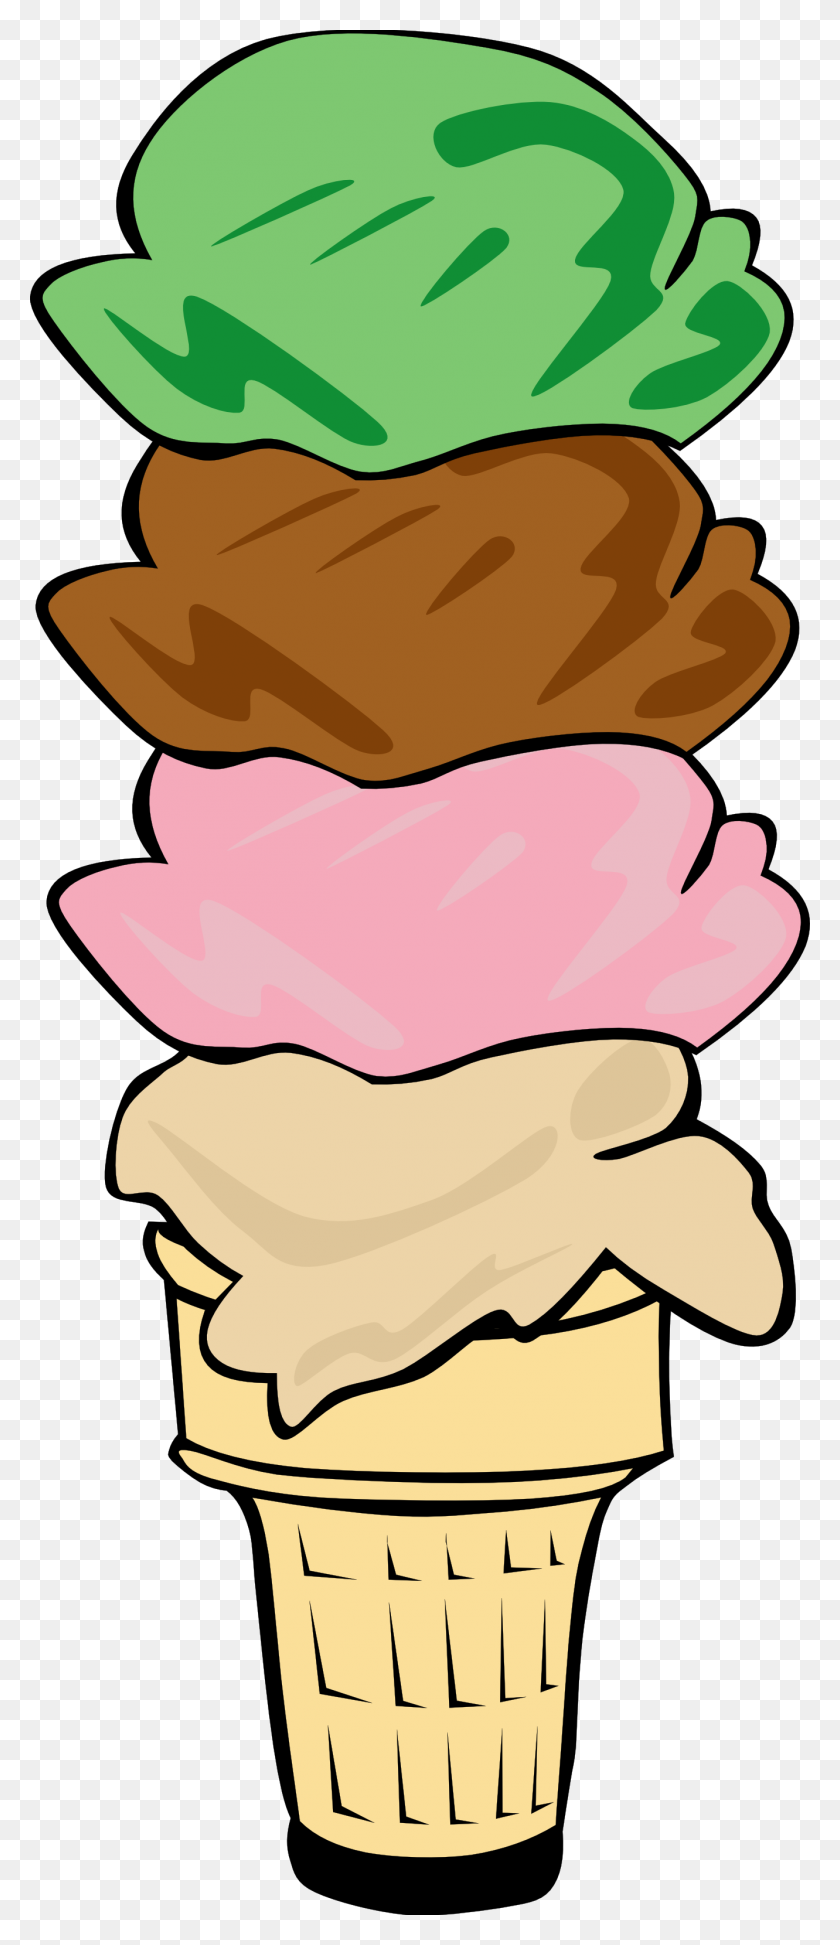 1331x3217 Ice Cream Drumstick Clipart - Drumstick Clipart